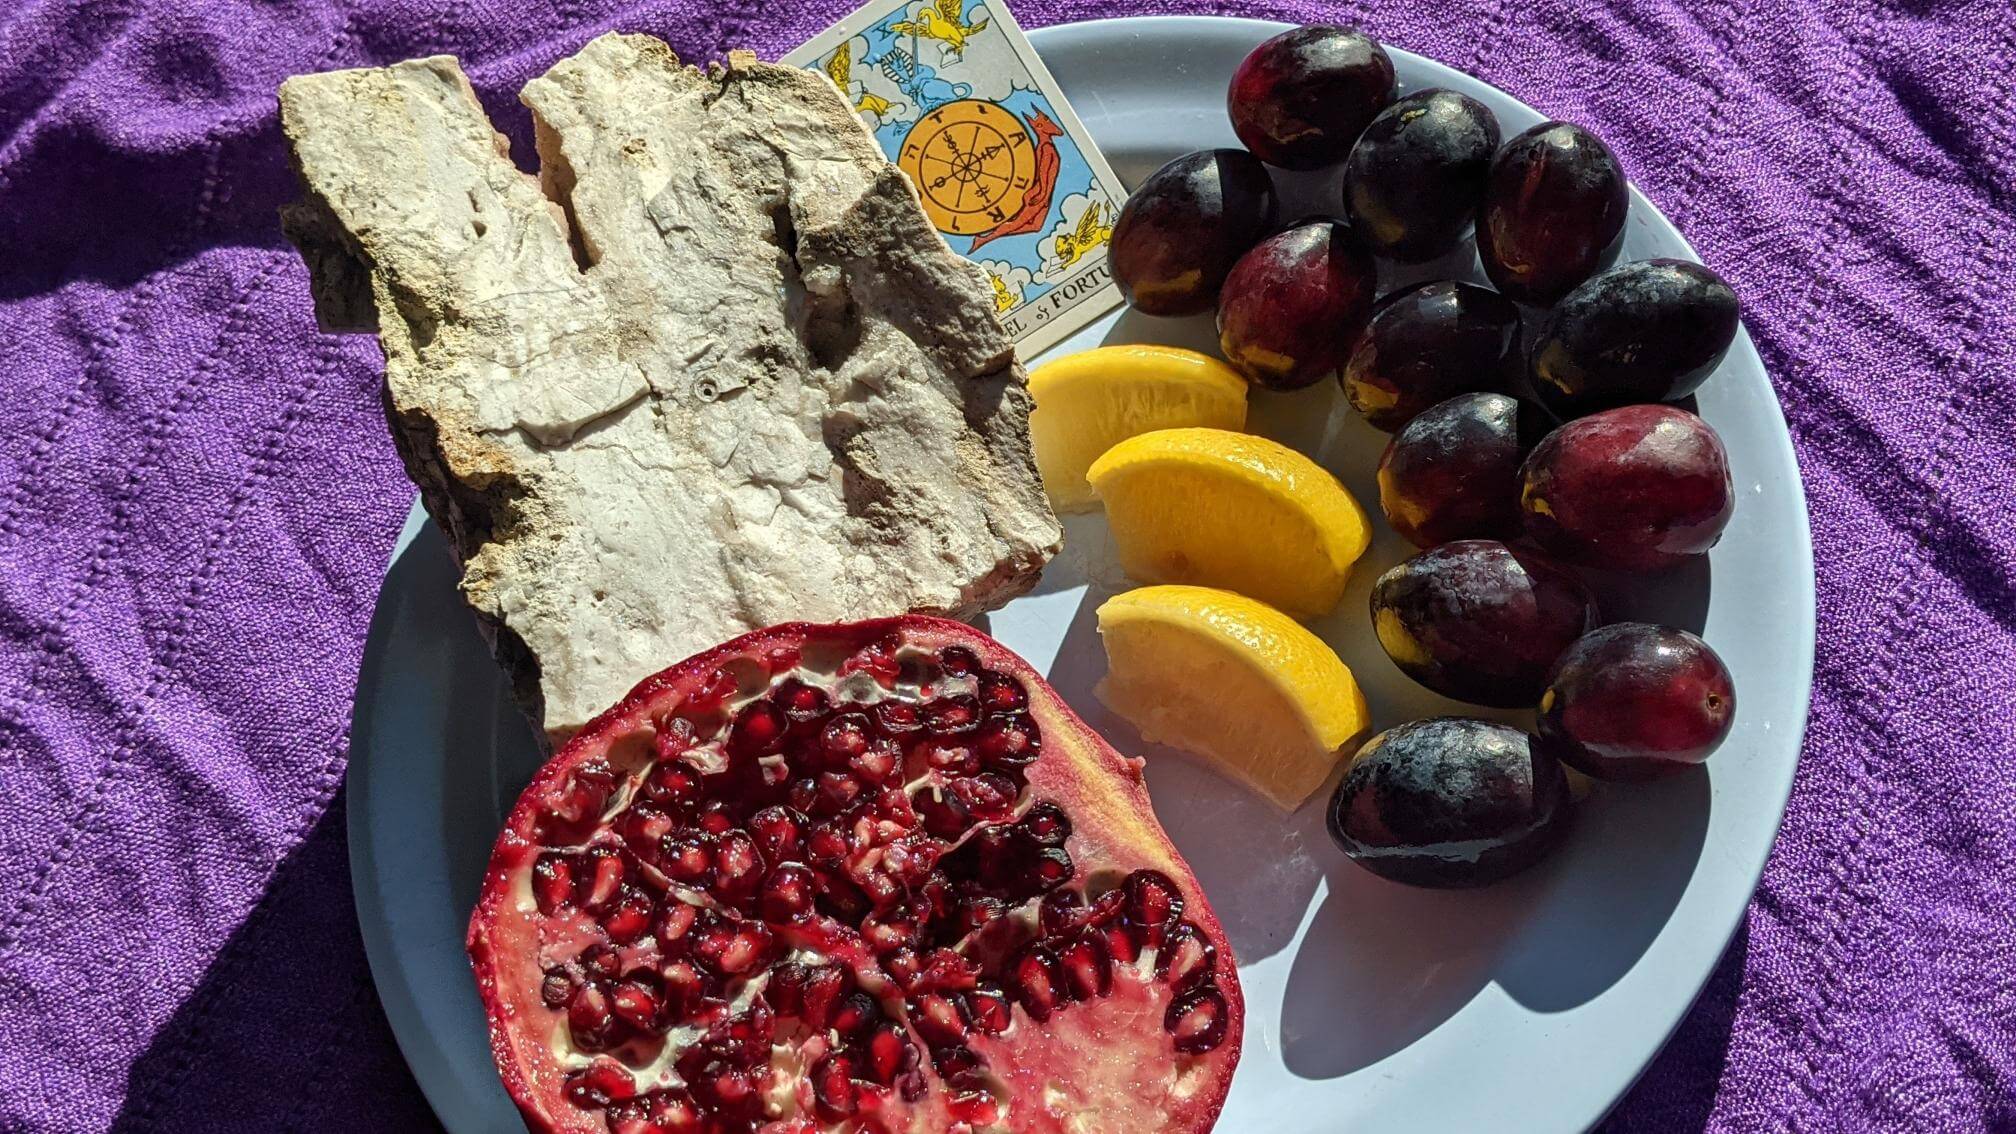 In natural daylight on a purple tablecloth, a fresh pomegranate is cracked open. Next to it on a blue plate, a chunk of rock with a quartzite notch, fresh slices of lemon and 12 red grapes sit by a jar of honey.